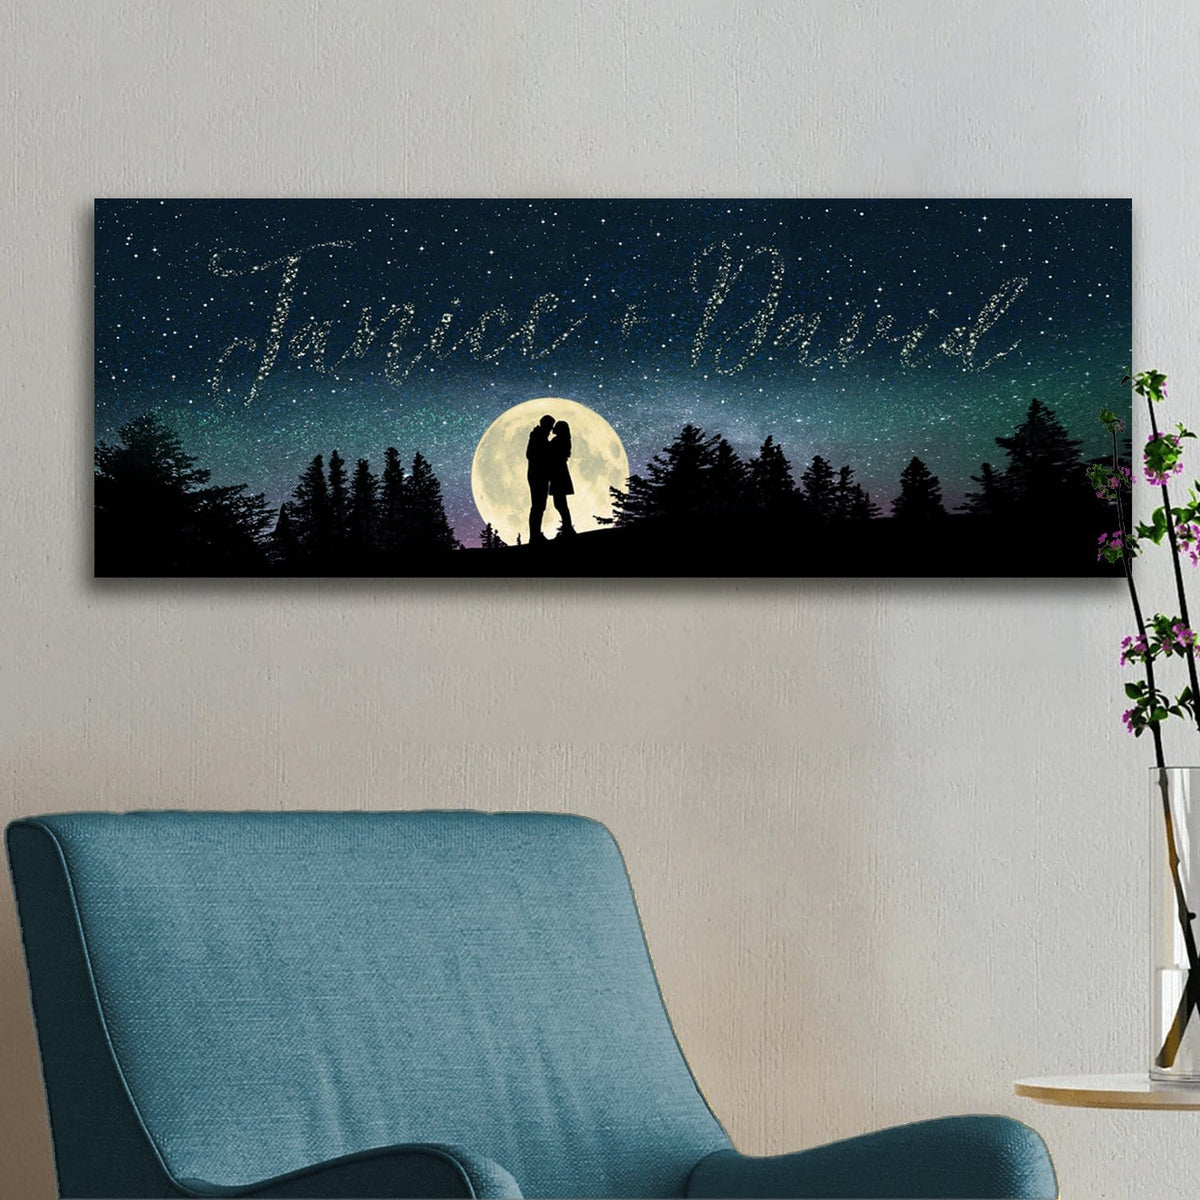 Romantic personalized art from Personal Prints - Names in stars